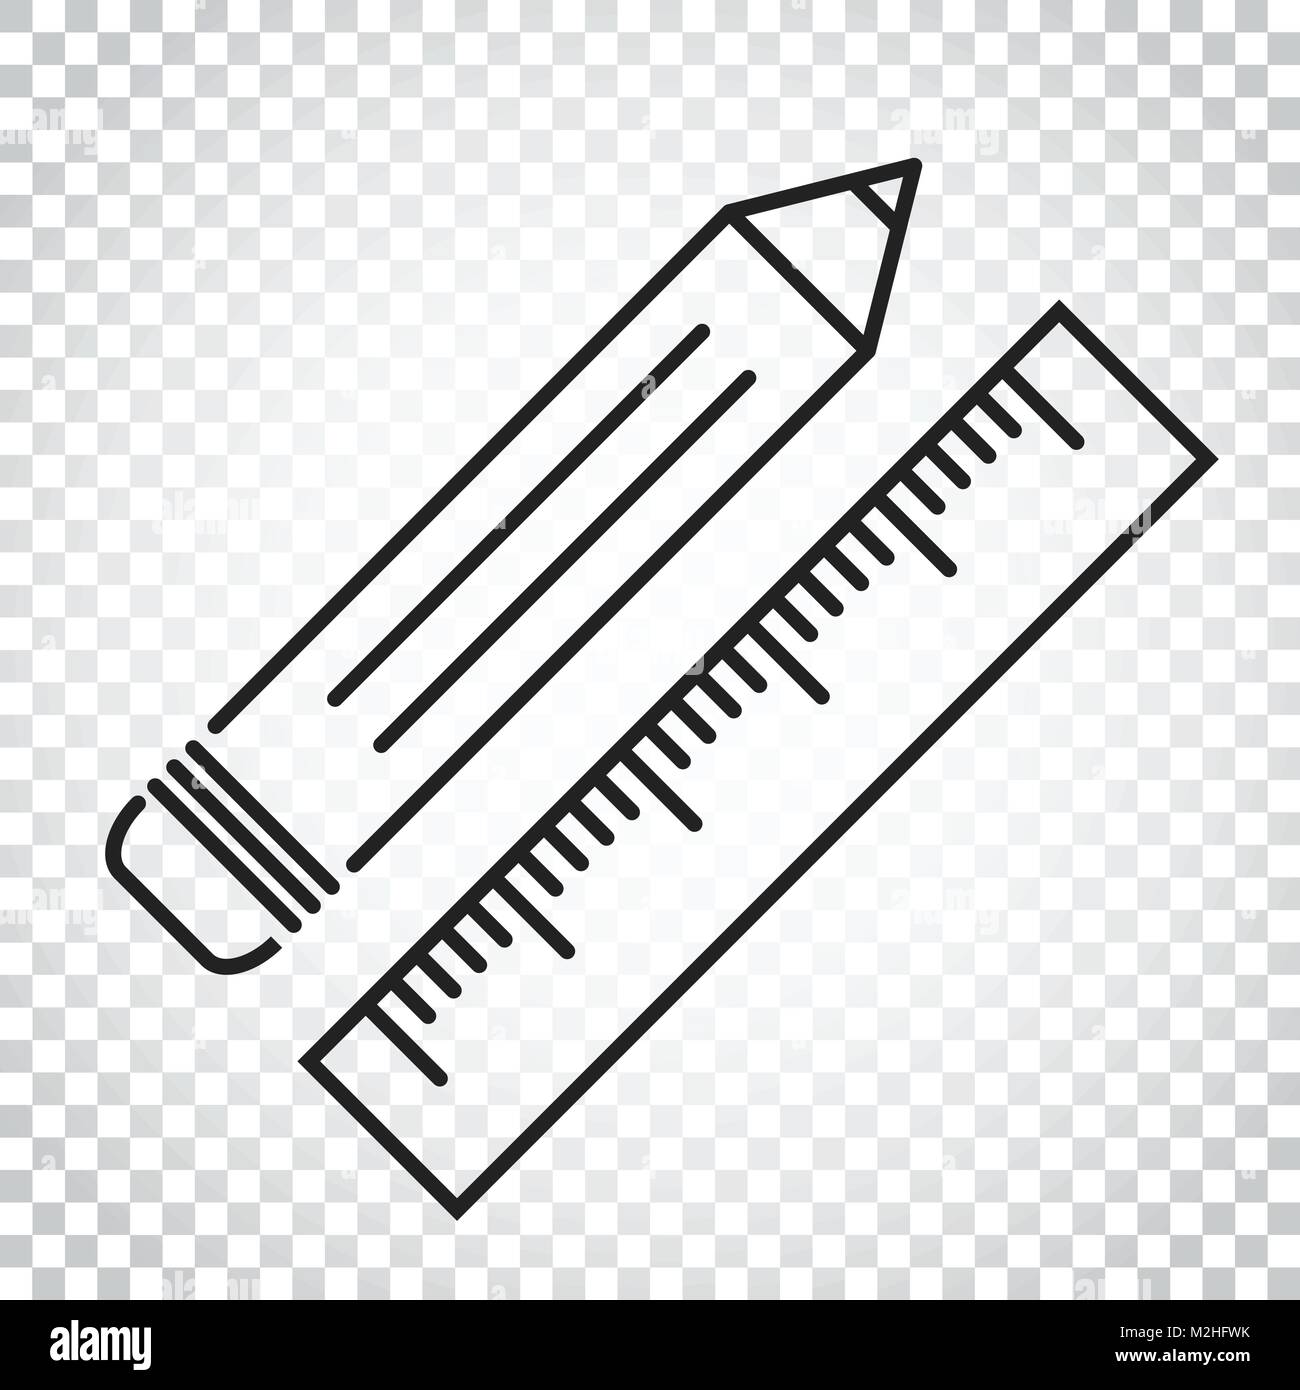 Pencil and ruler sketch icons Royalty Free Vector Image